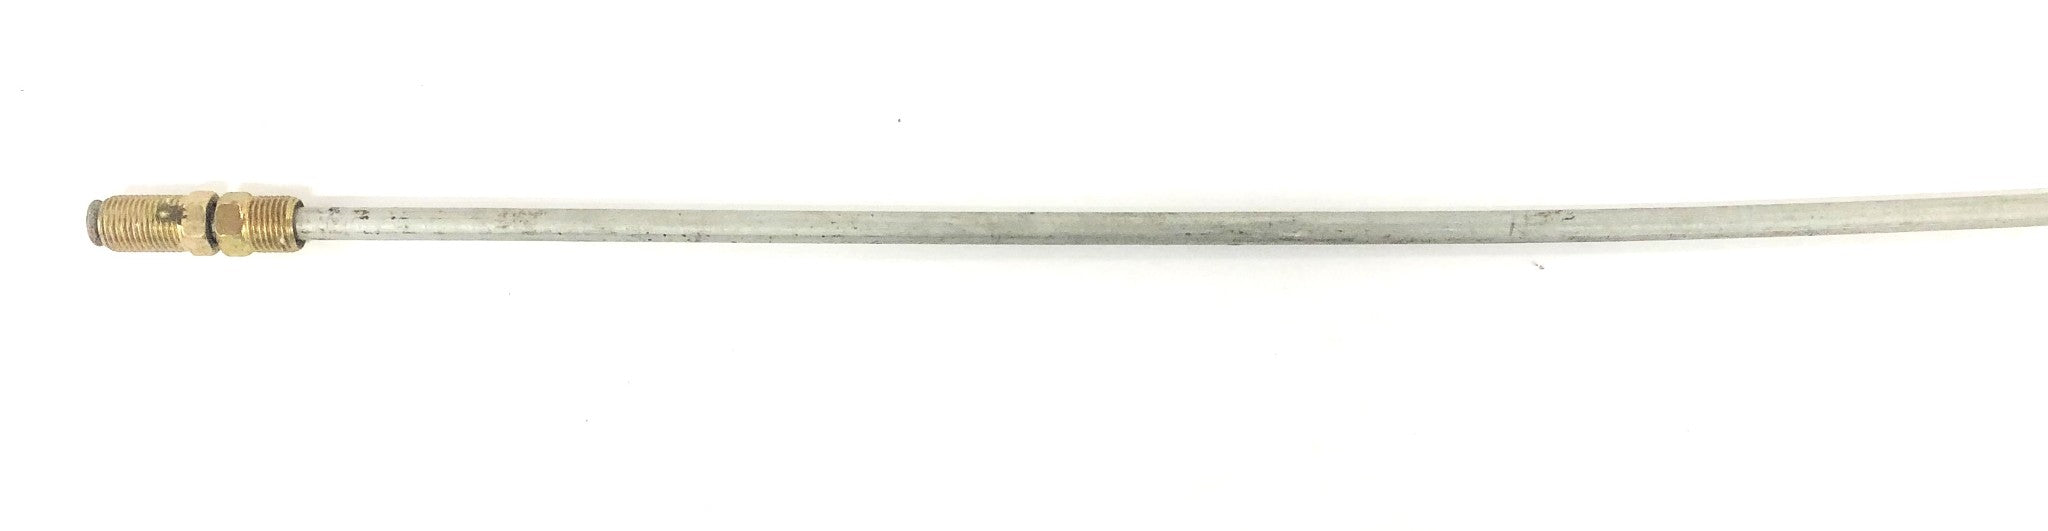 Unbranded Brake Line With Minor Bending 1/4X60 Inch NOS